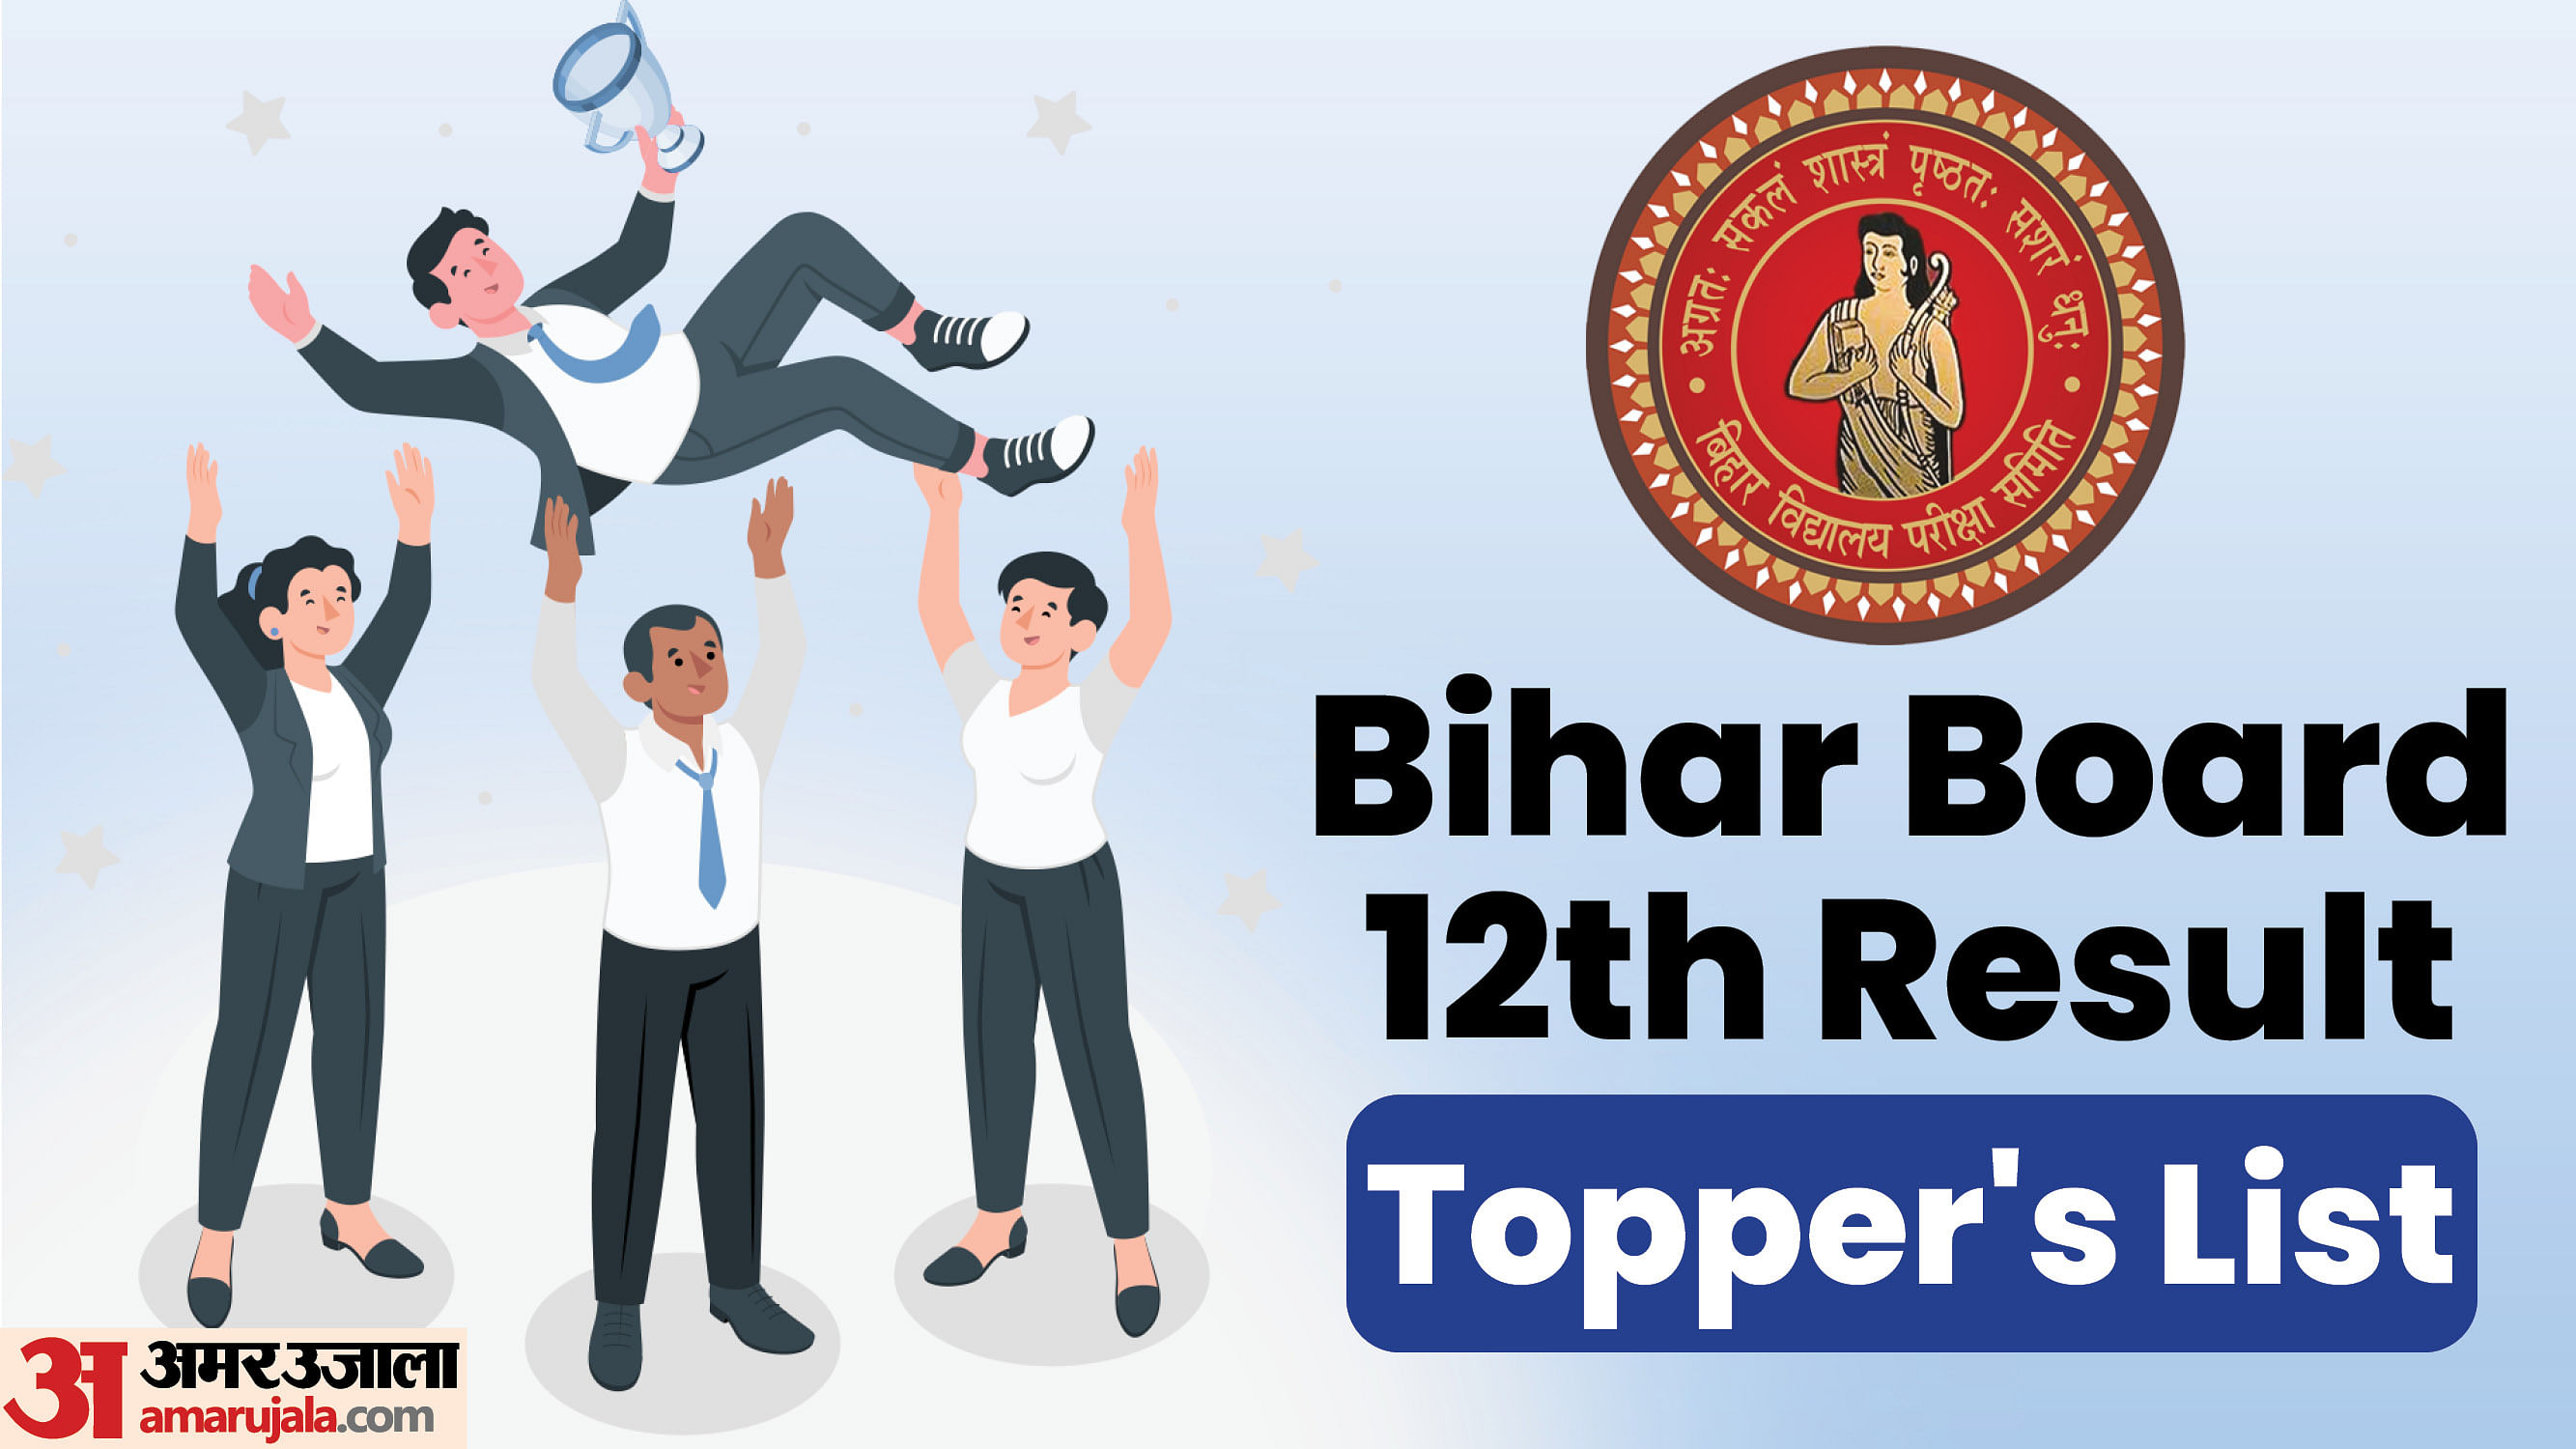 Bihar Board Class 12th Topper's List: Check the Name, score and details here